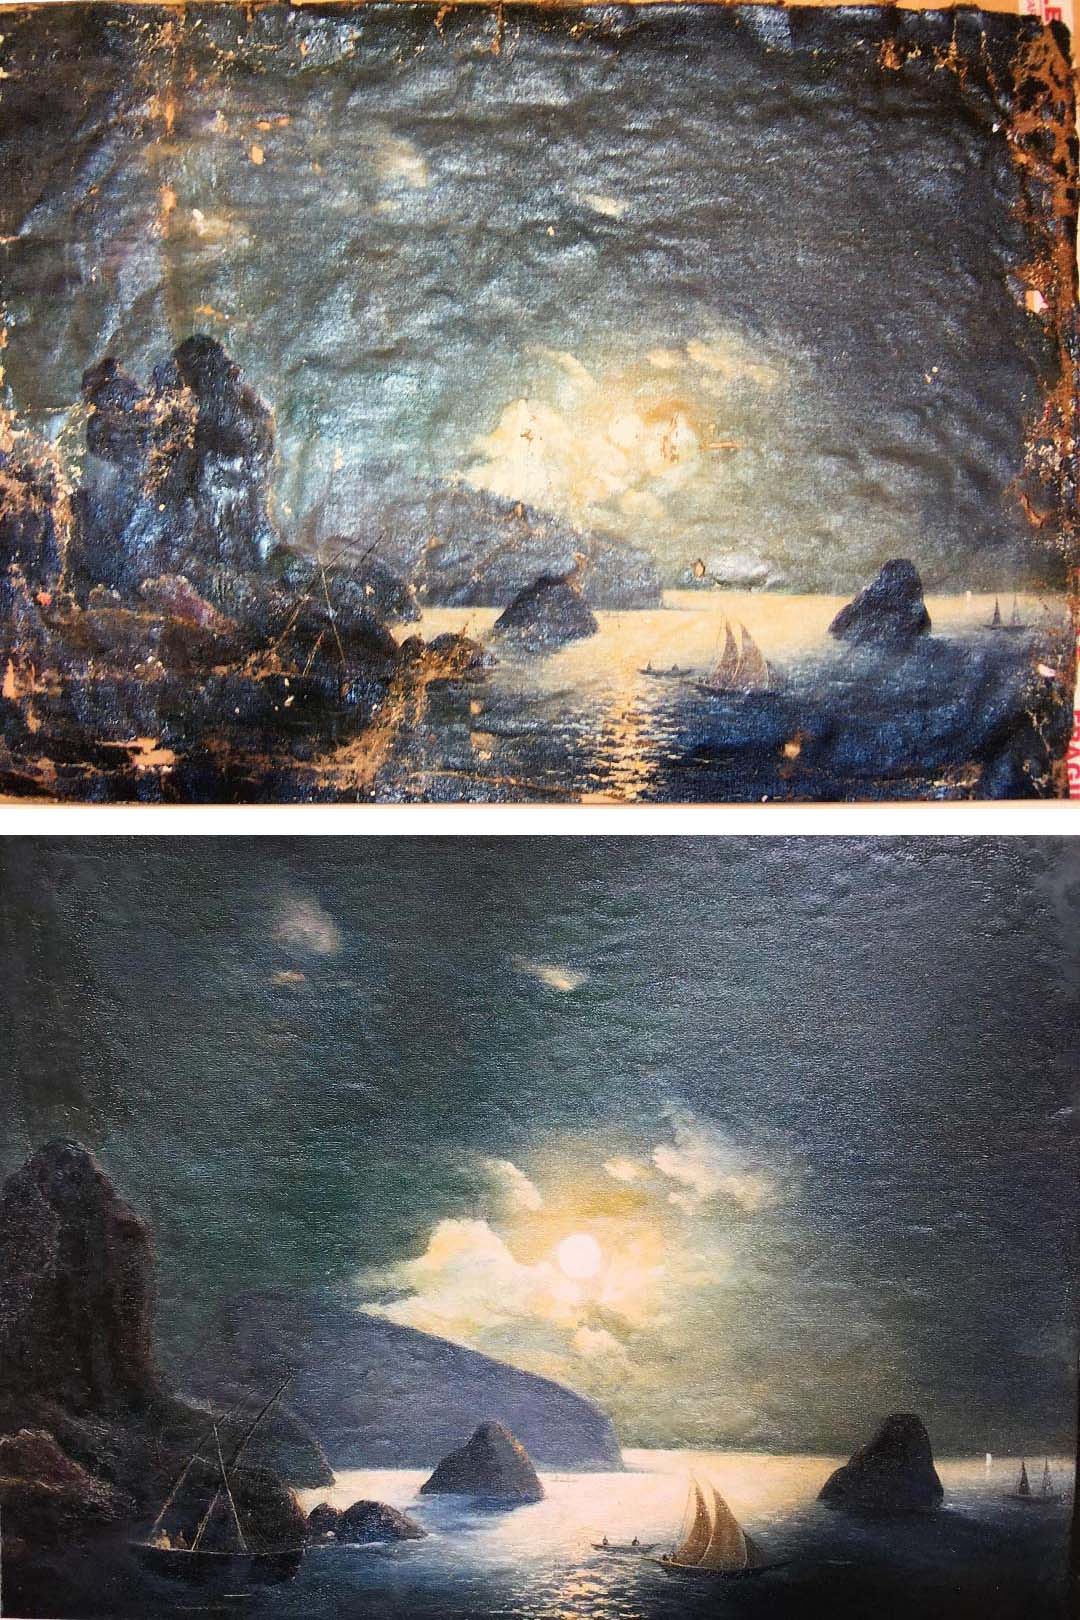 Two paintings of a cave and the sun